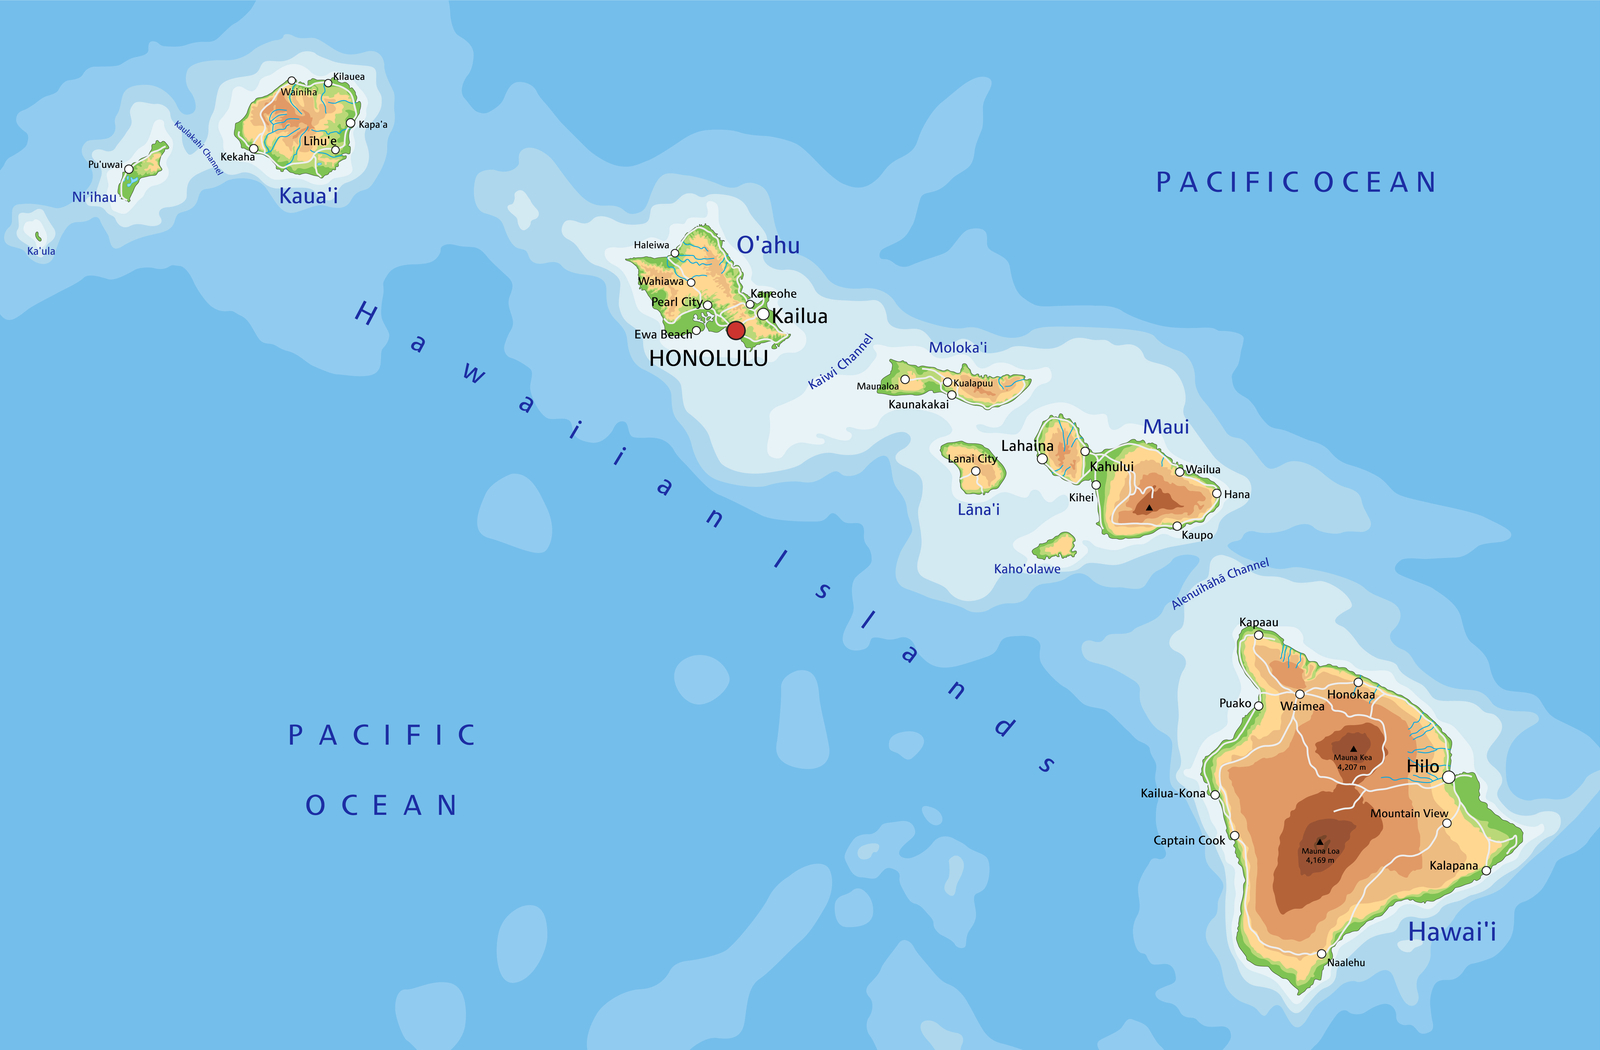 Detailed map of the Hawaiian Islands for a piece explaining what to do on each